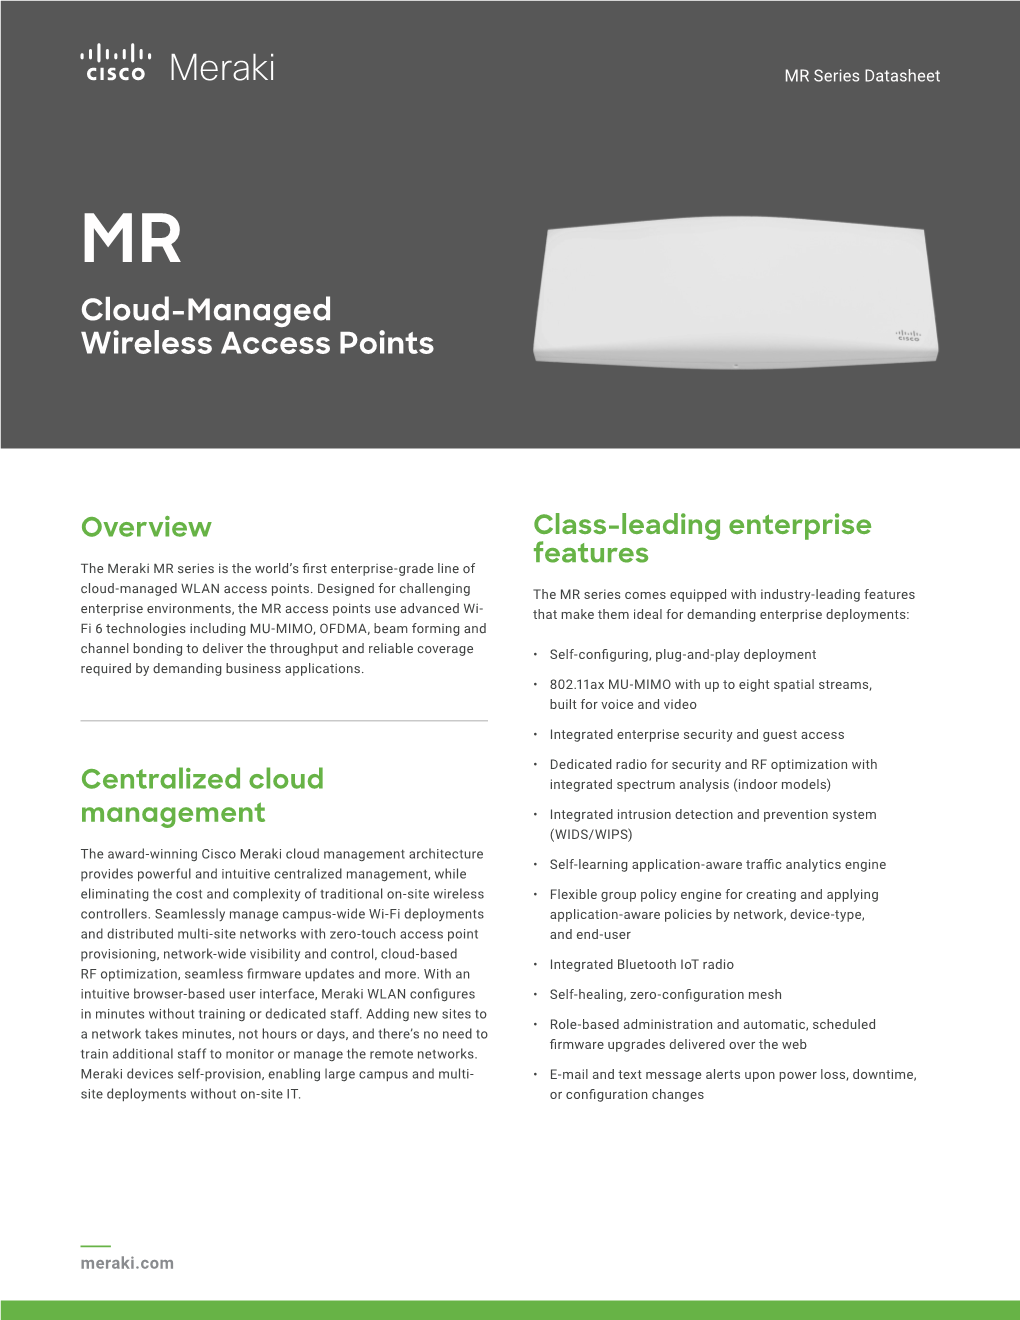 Cloud-Managed Wireless Access Points